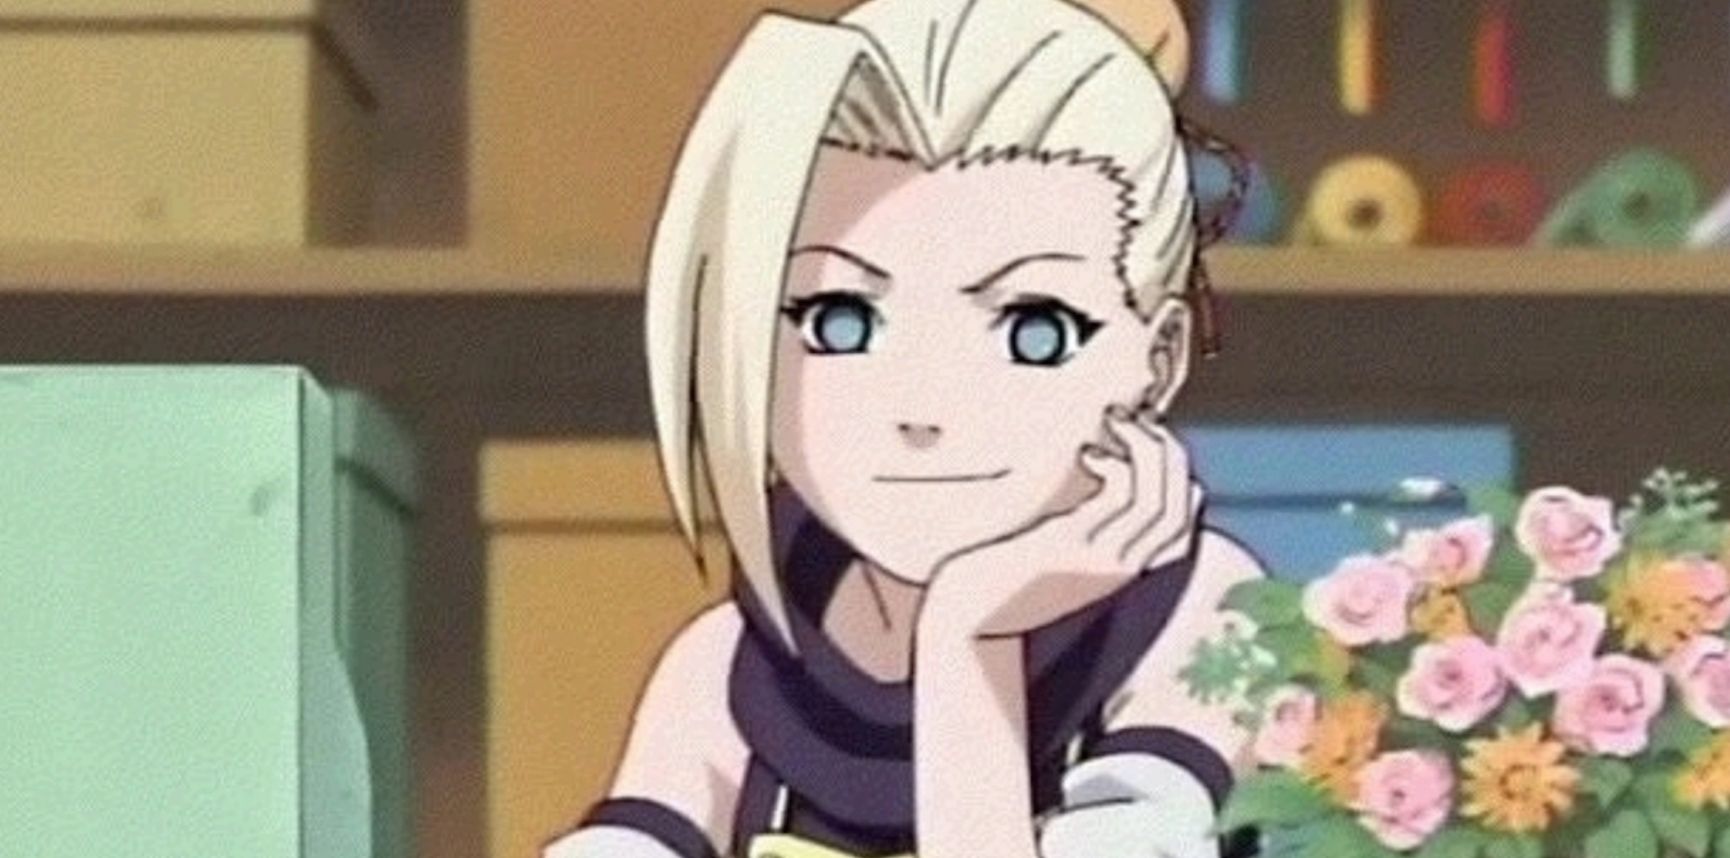 Ino at the Ymanaka flower shop in Naruto